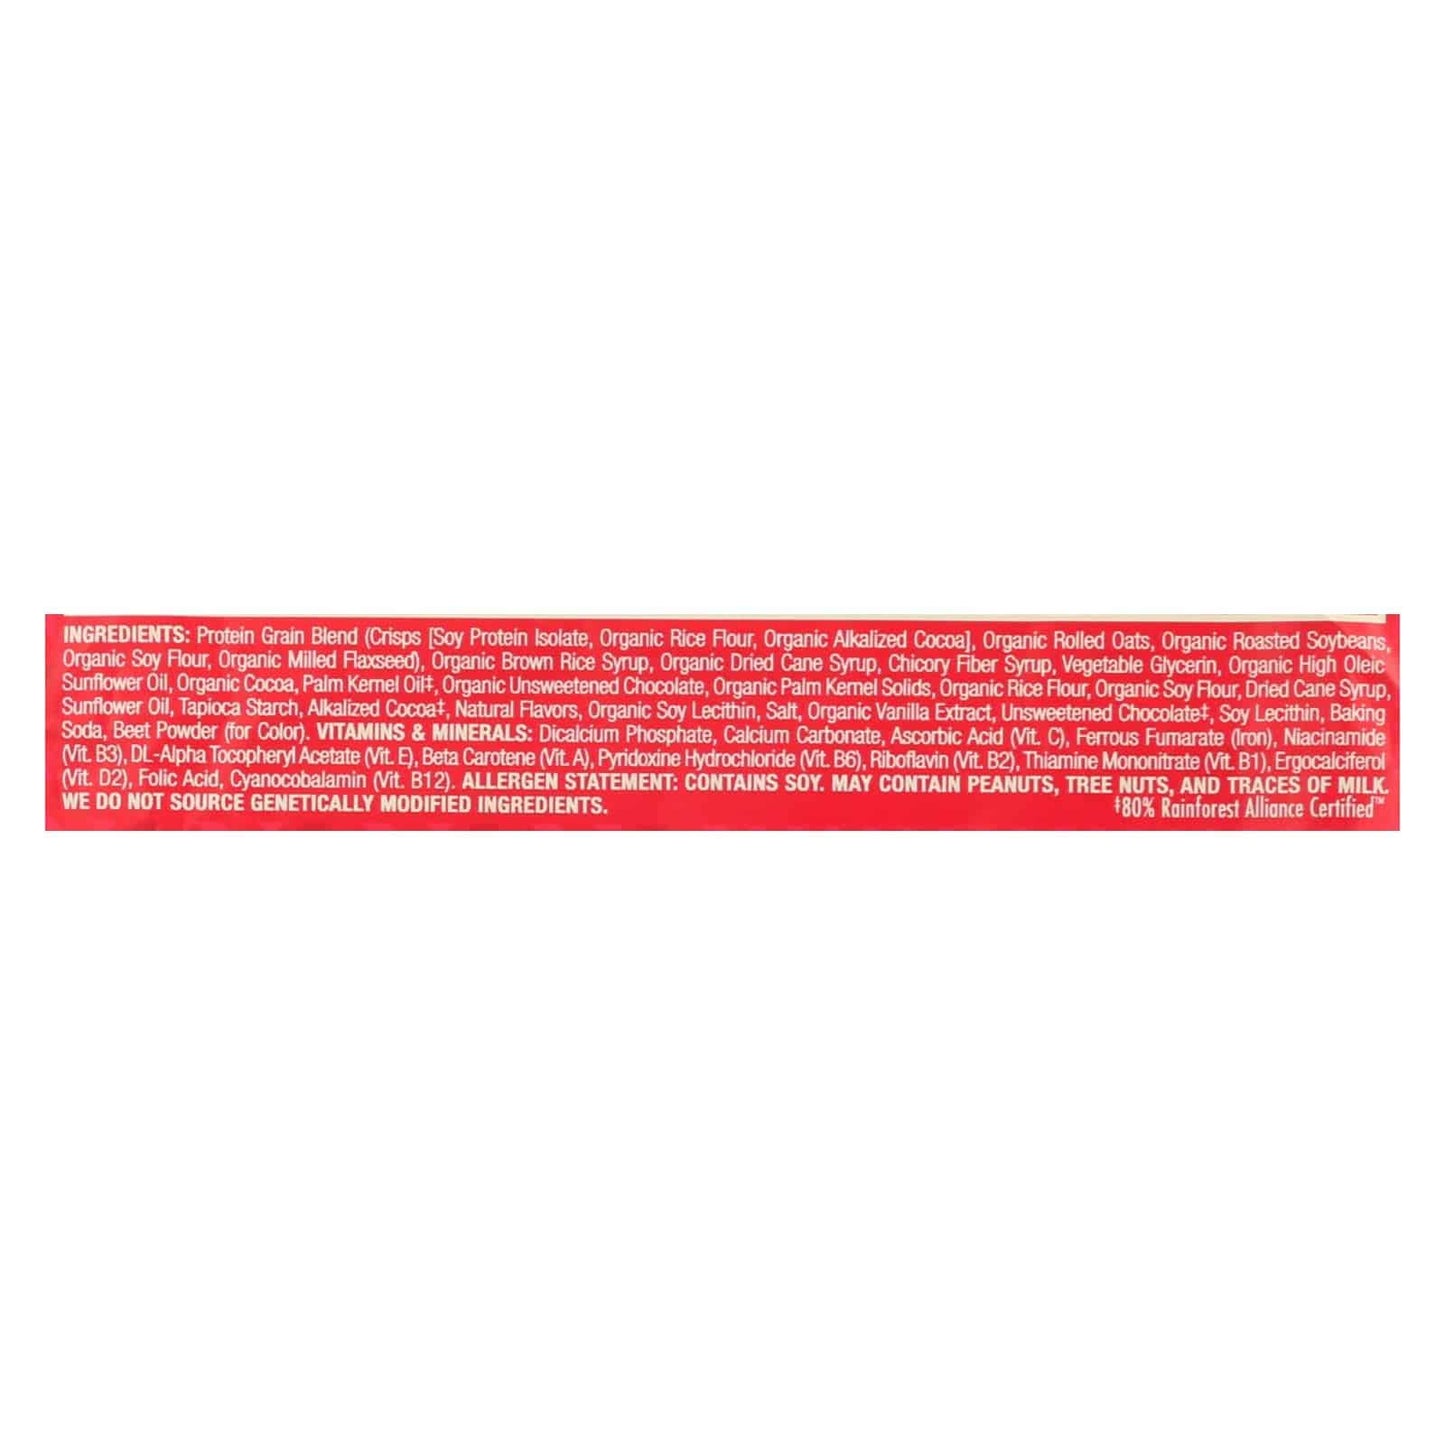 Buy Clif Bar Luna Bar - Organic Chocolate Peppermint - Case Of 15 - 1.69 Oz  at OnlyNaturals.us